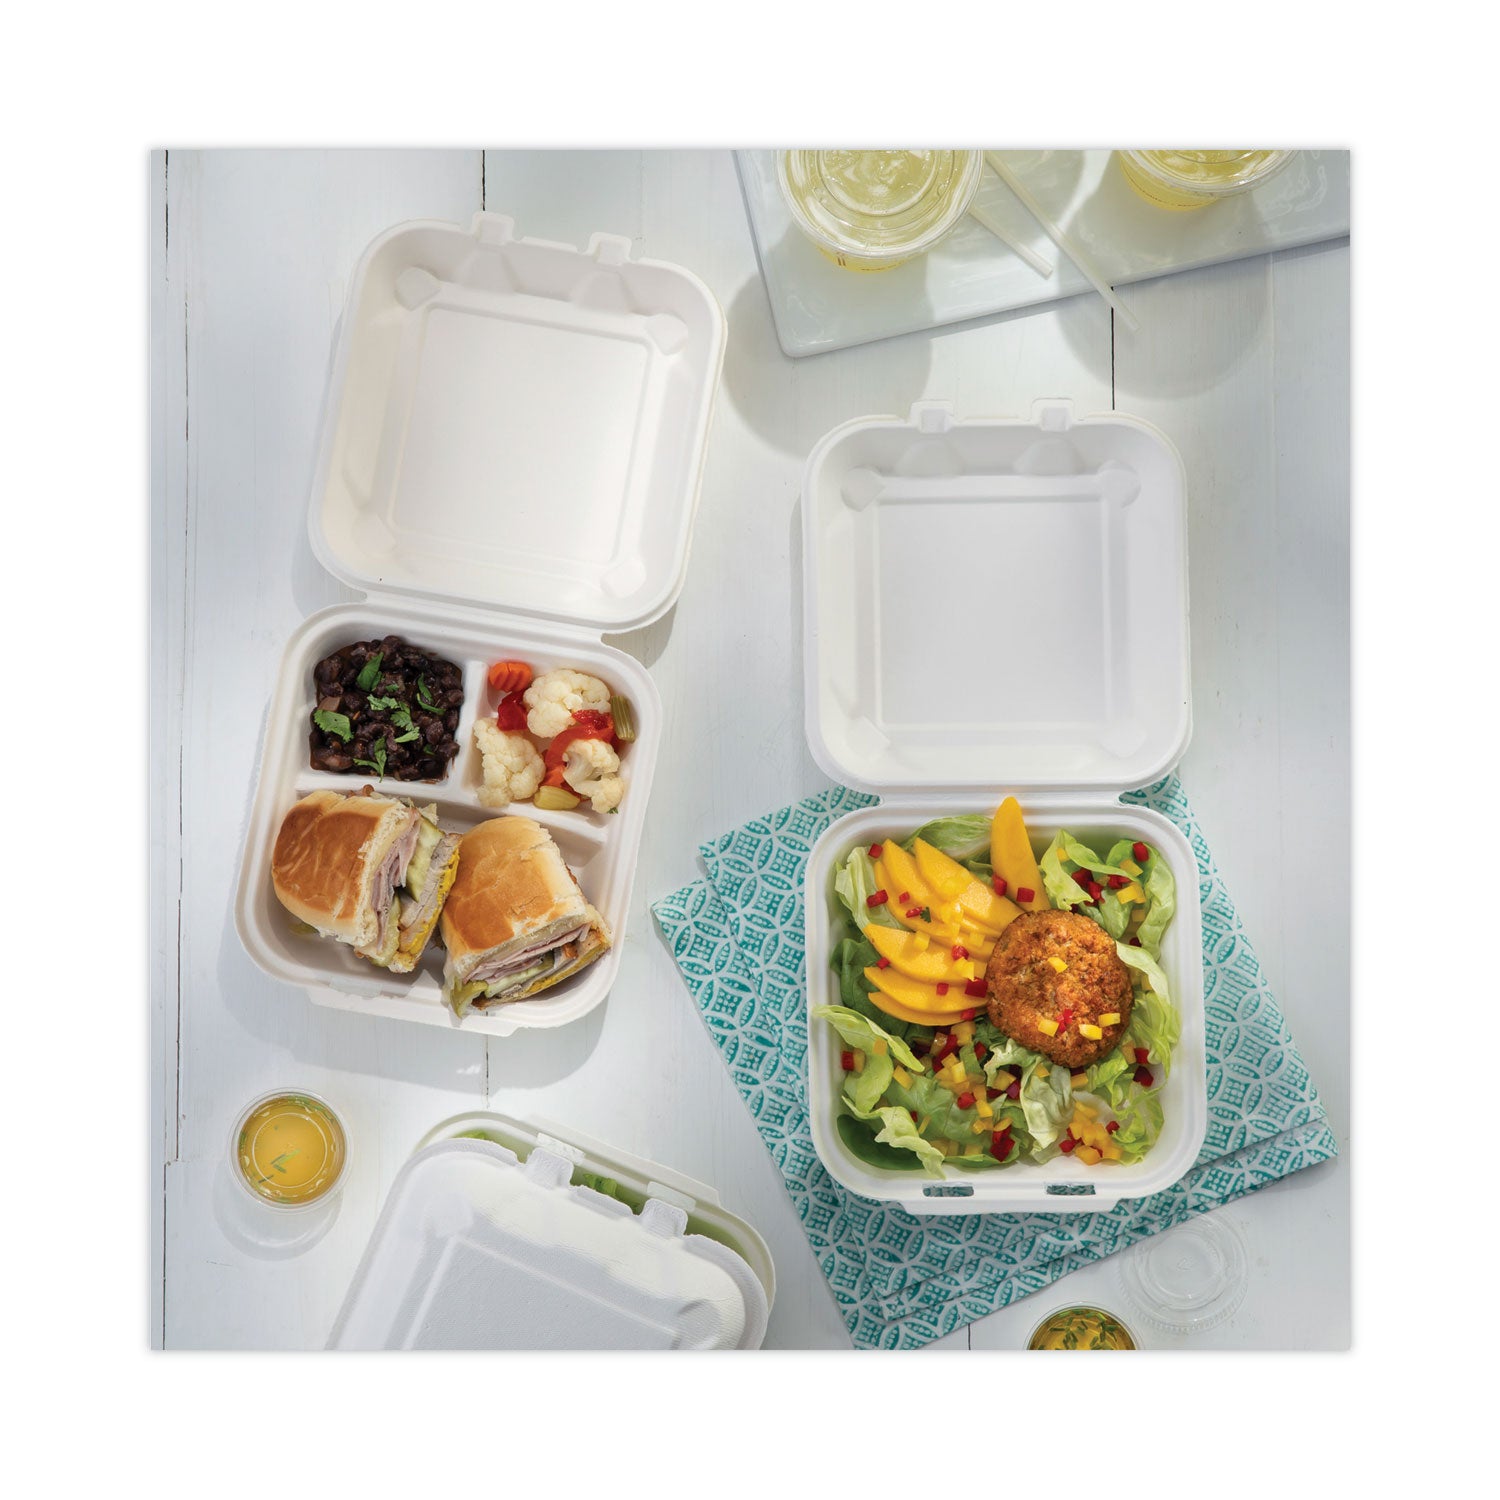 earthchoice-bagasse-hinged-lid-container-3-compartment-dual-tab-lock-78-x-78-x-28-natural-sugarcane-150-carton_pctymch08030001 - 5